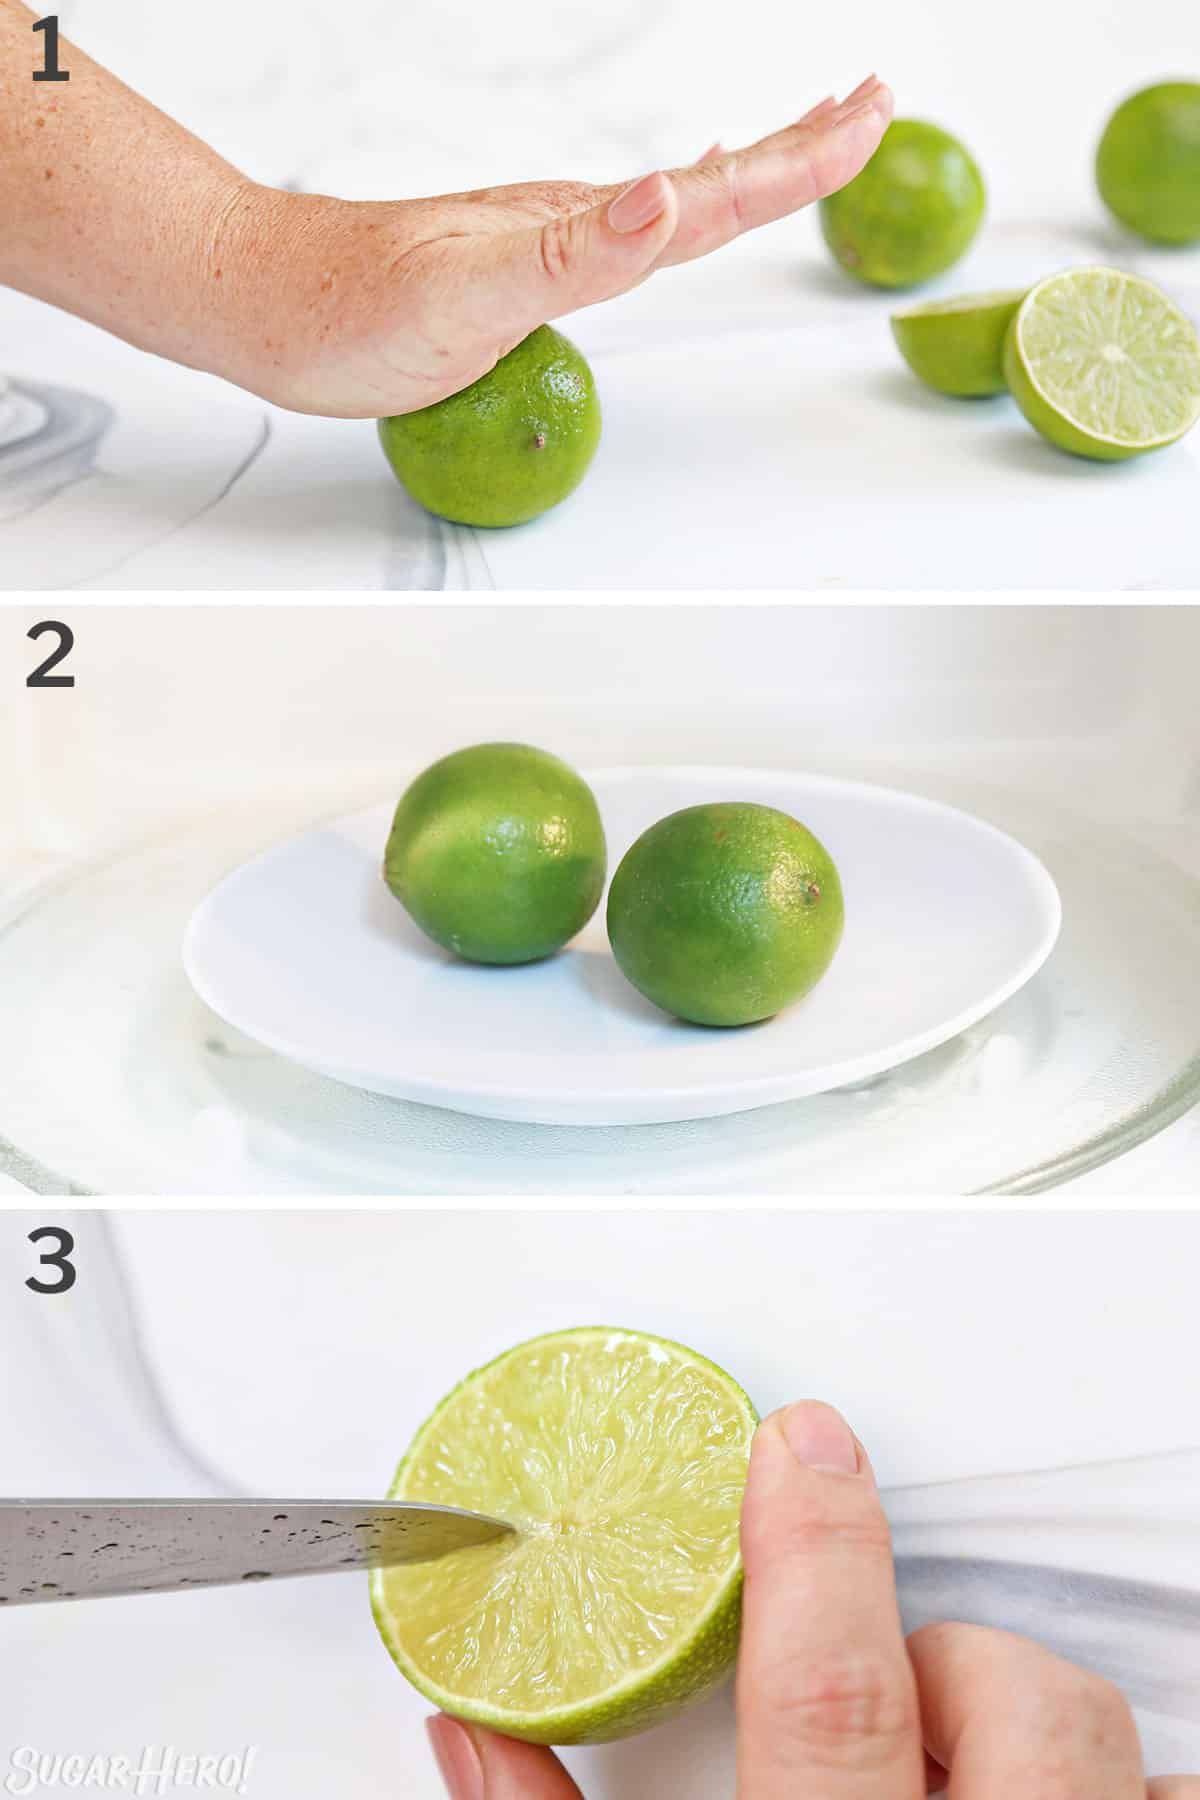 Three photo collage showing how to prepare limes for juicing.